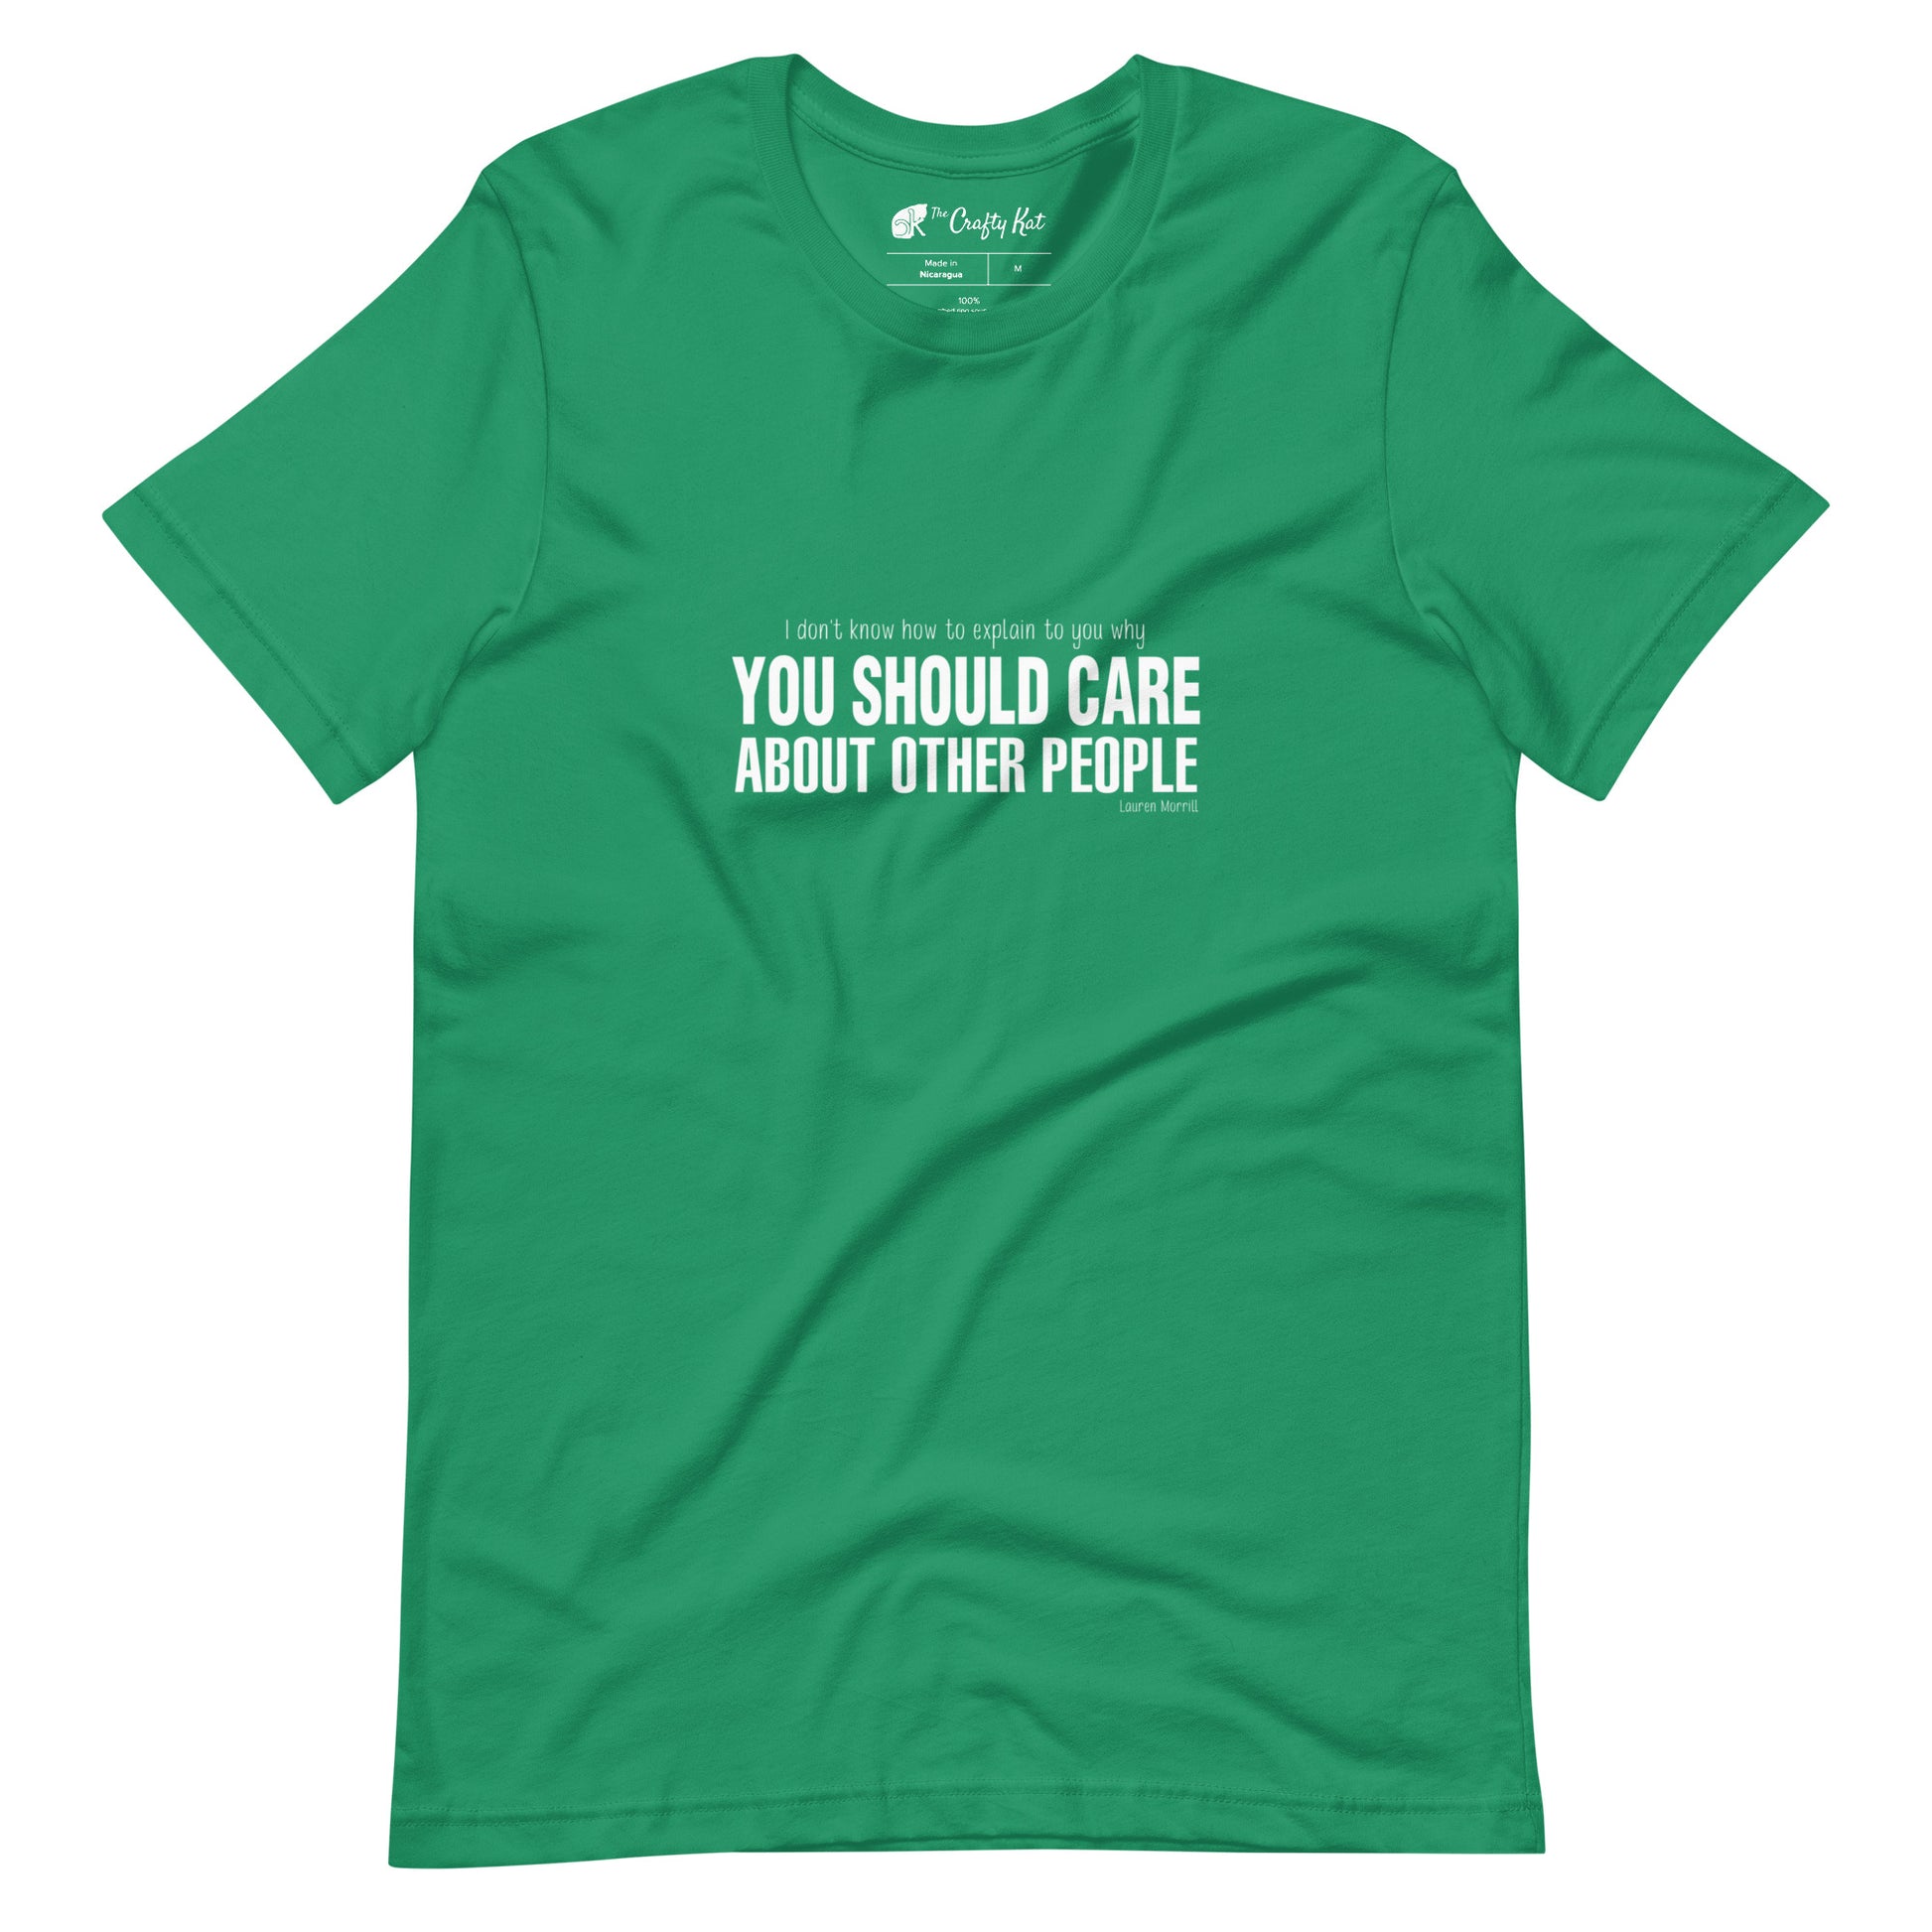 Kelly green t-shirt with quote by Lauren Morrill: "I don't know how to explain to you why YOU SHOULD CARE ABOUT OTHER PEOPLE"